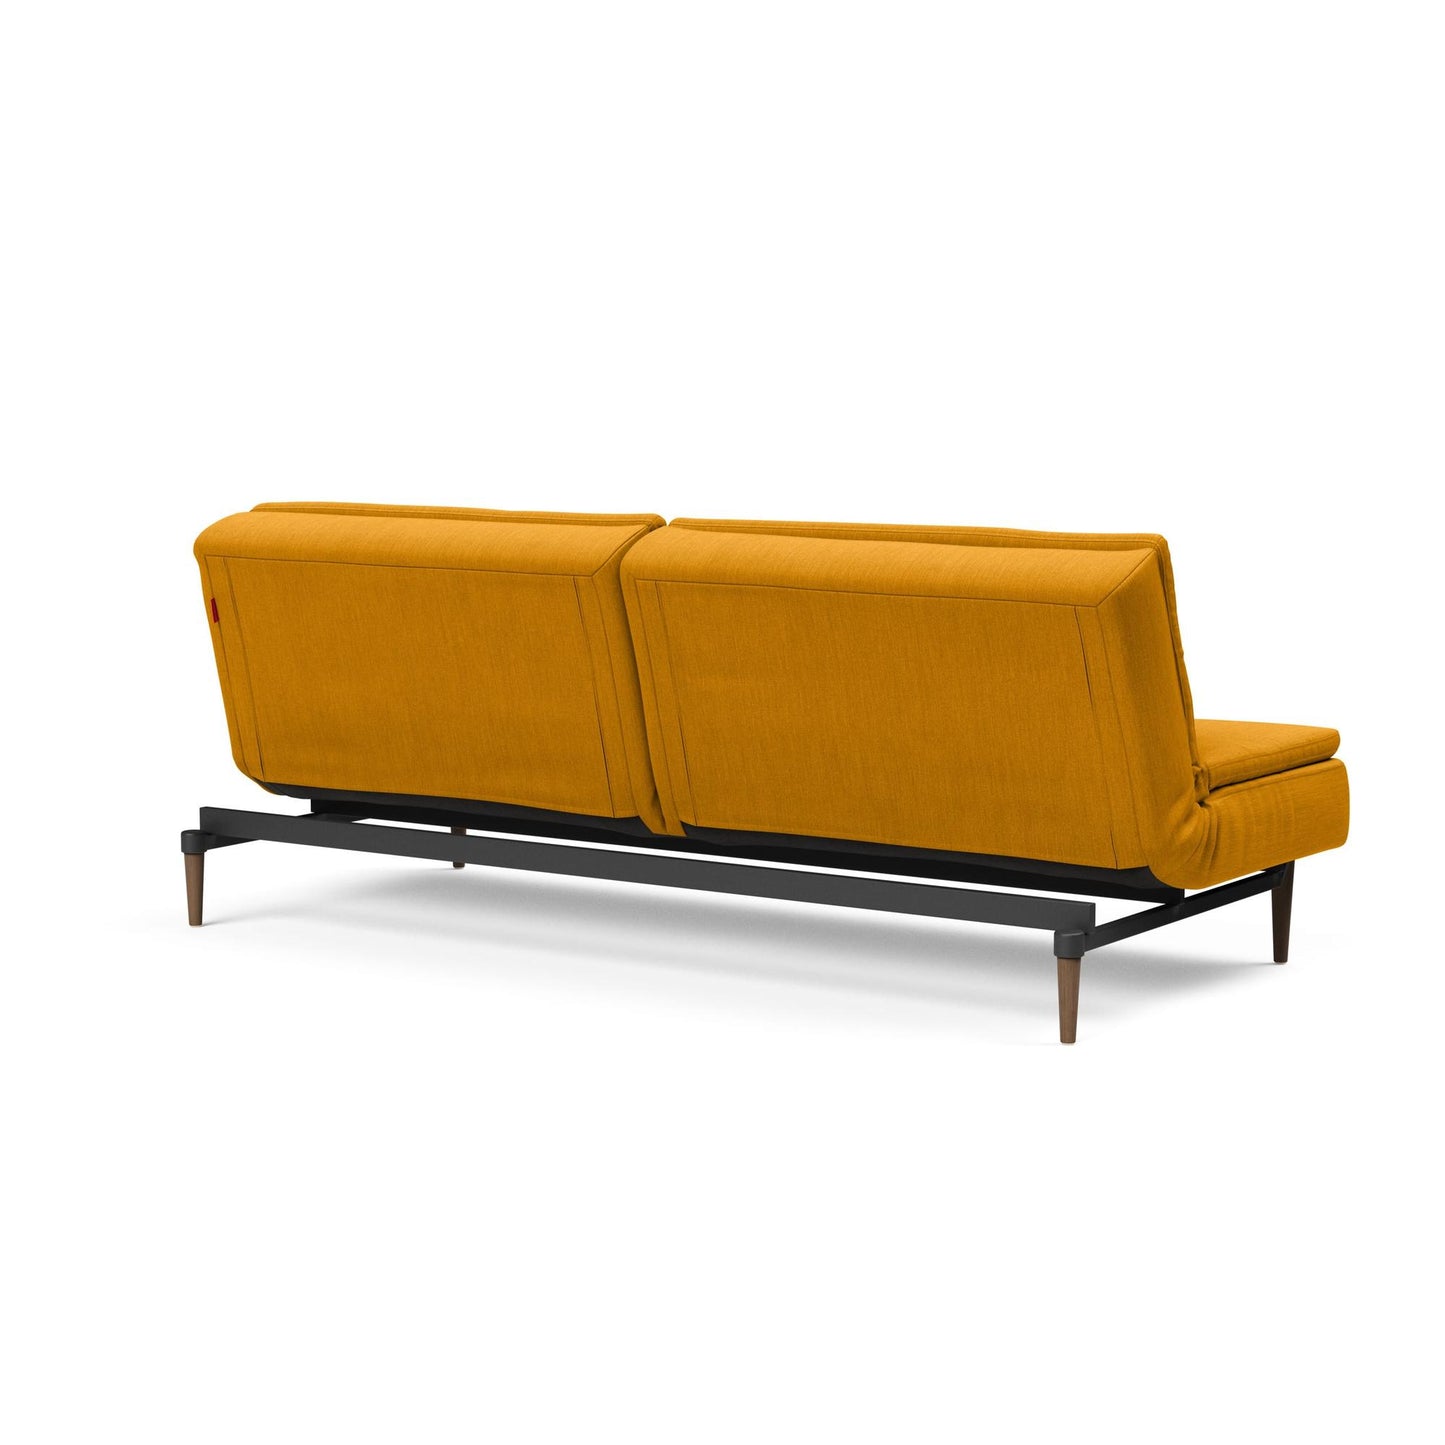 Dublexo Deluxe Sofa Bed in Elegance Burned Curry